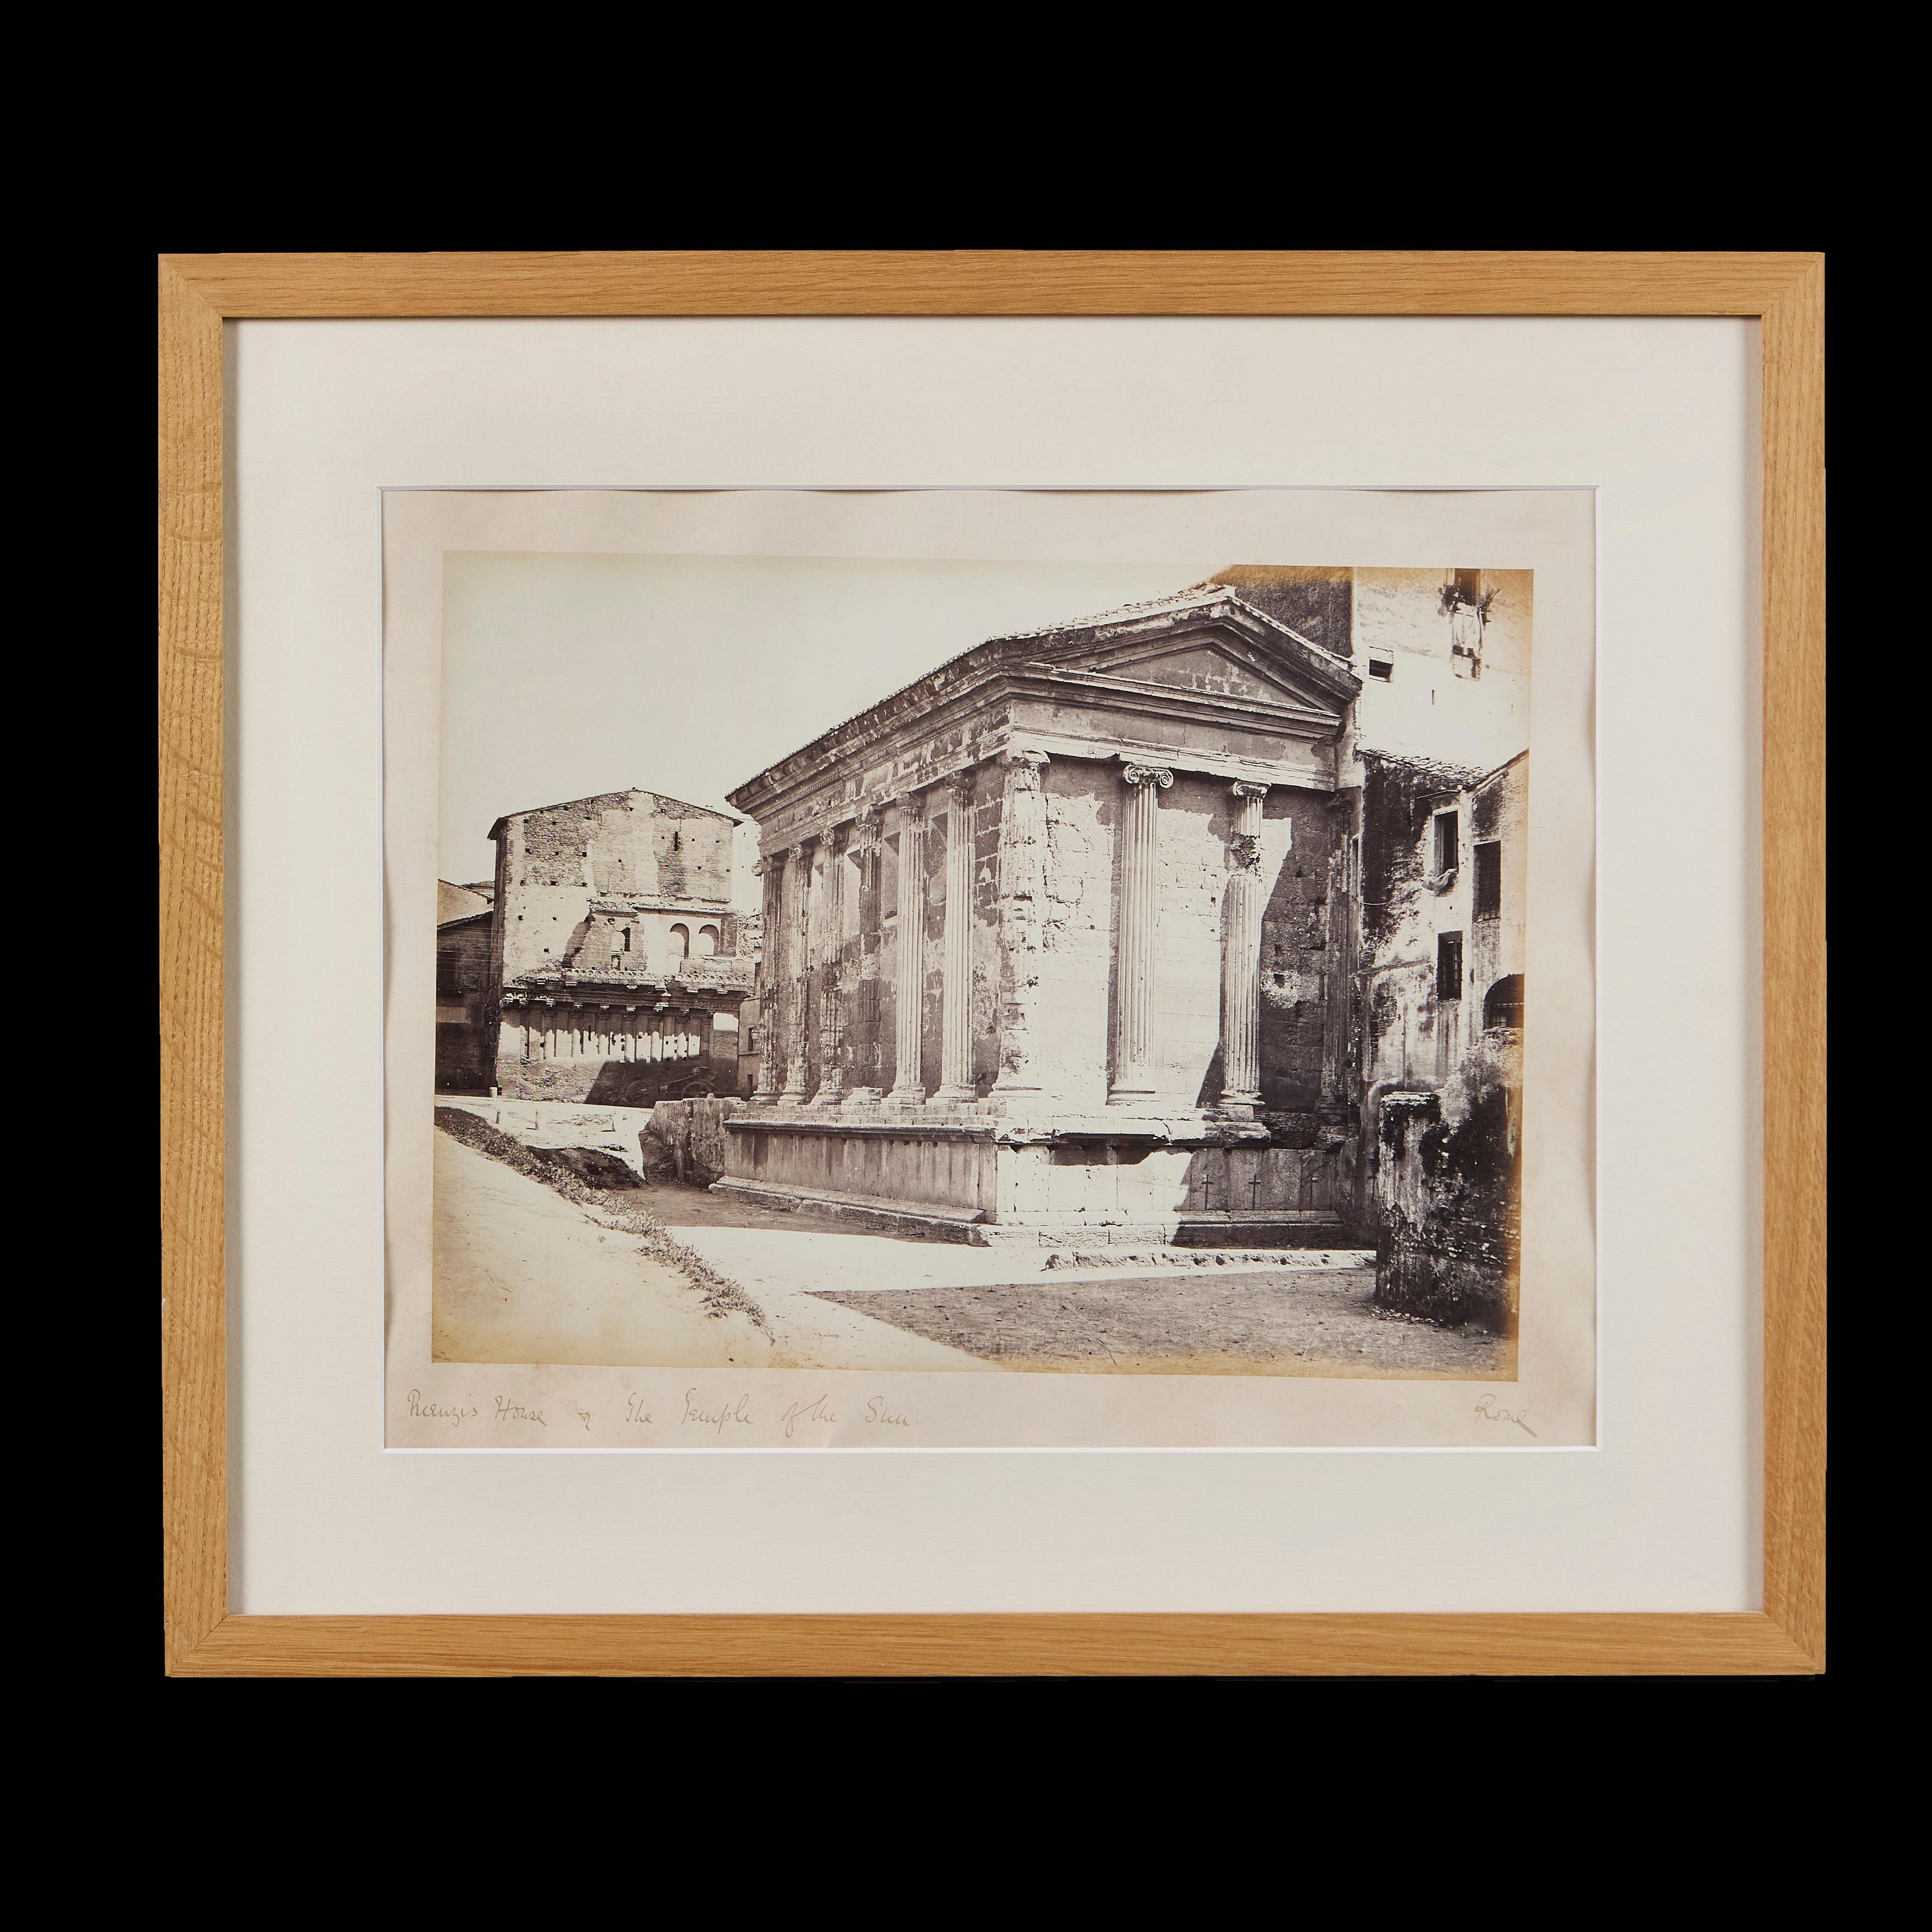 England, circa 1900

A set of four early twentieth century brown sepia photographic prints of scenes around Rome, all glazed and framed.

Height 47.00cm
Width 55.00cm
Depth 3.00cm